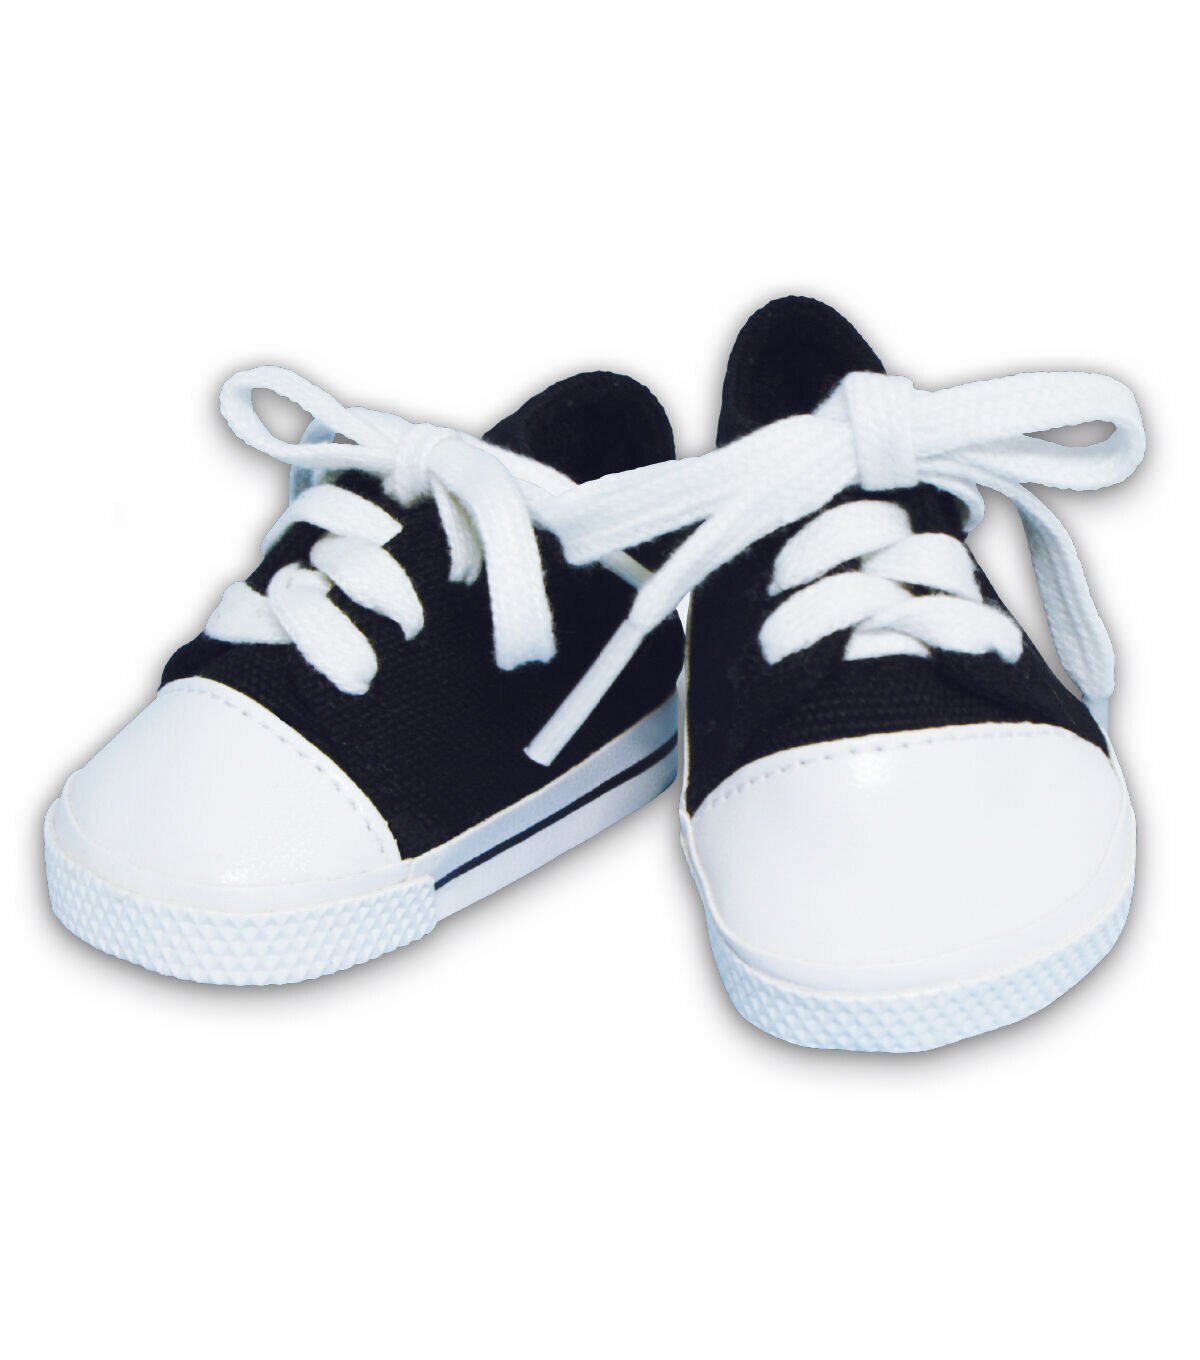 Handmade Fashion New white shoes for 18inch Doll Tennis Shoes Gift Super 